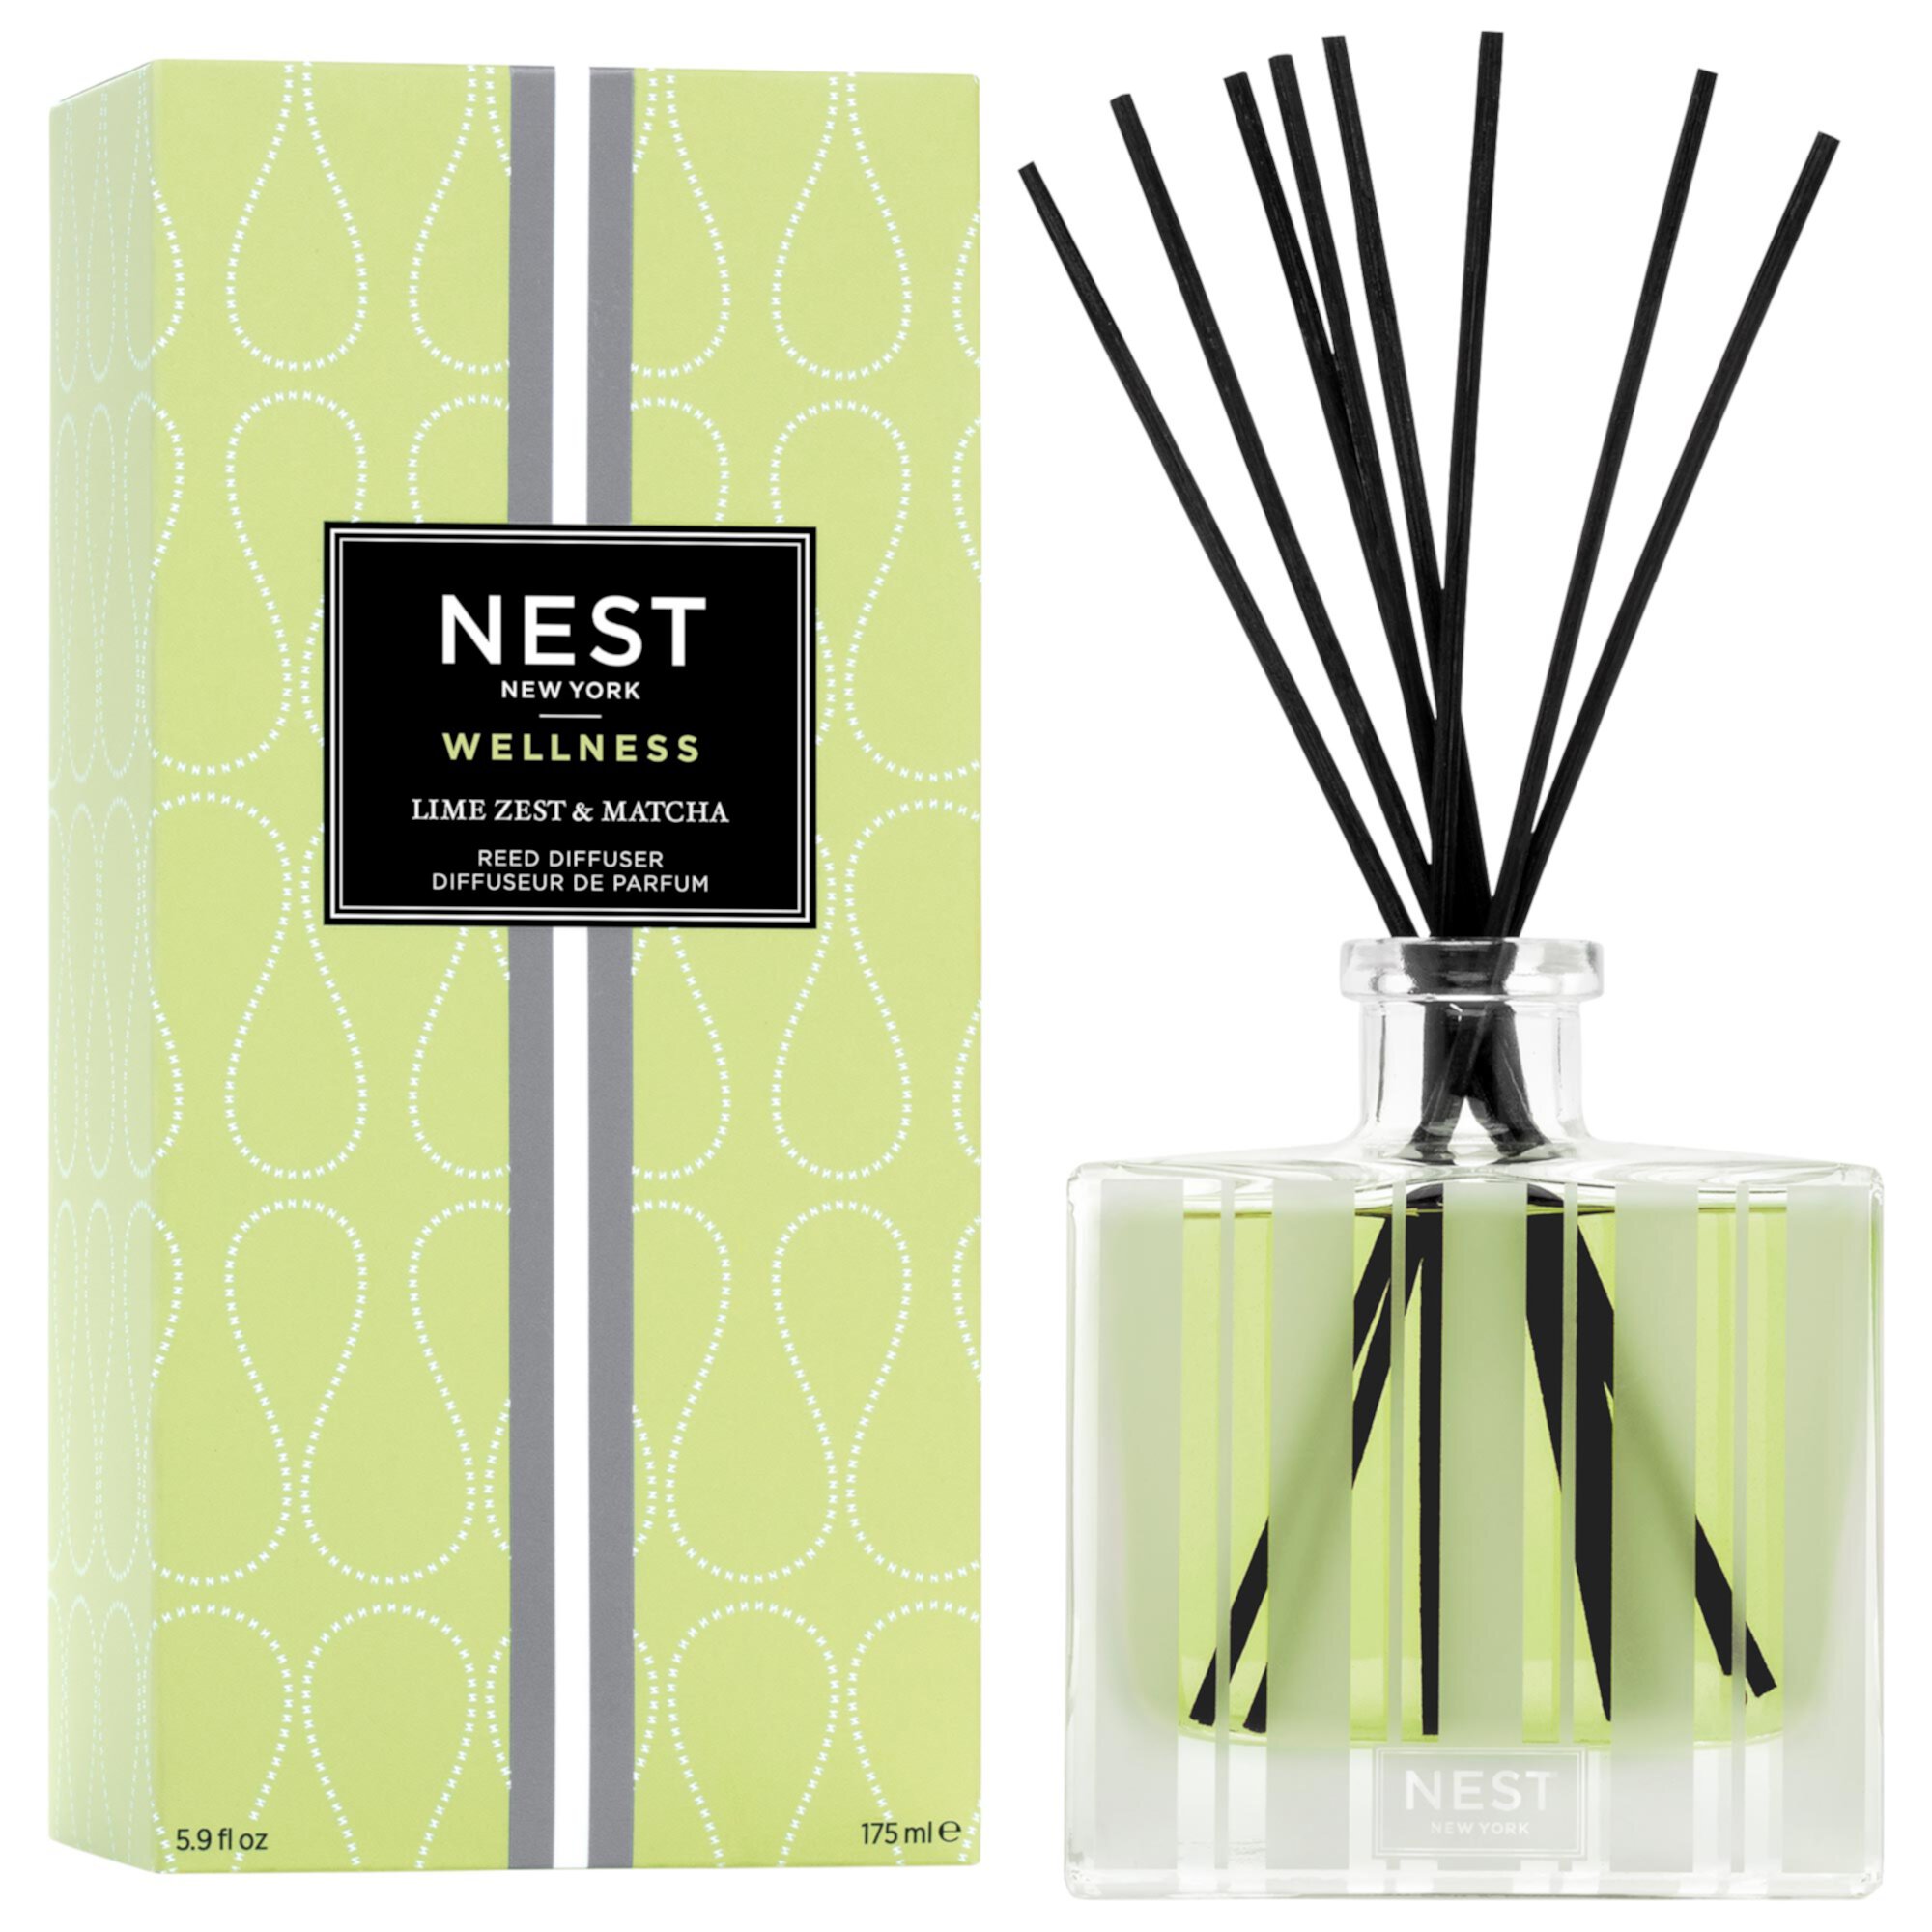 Lime Zest & Matcha Reed Diffuser Nest New York